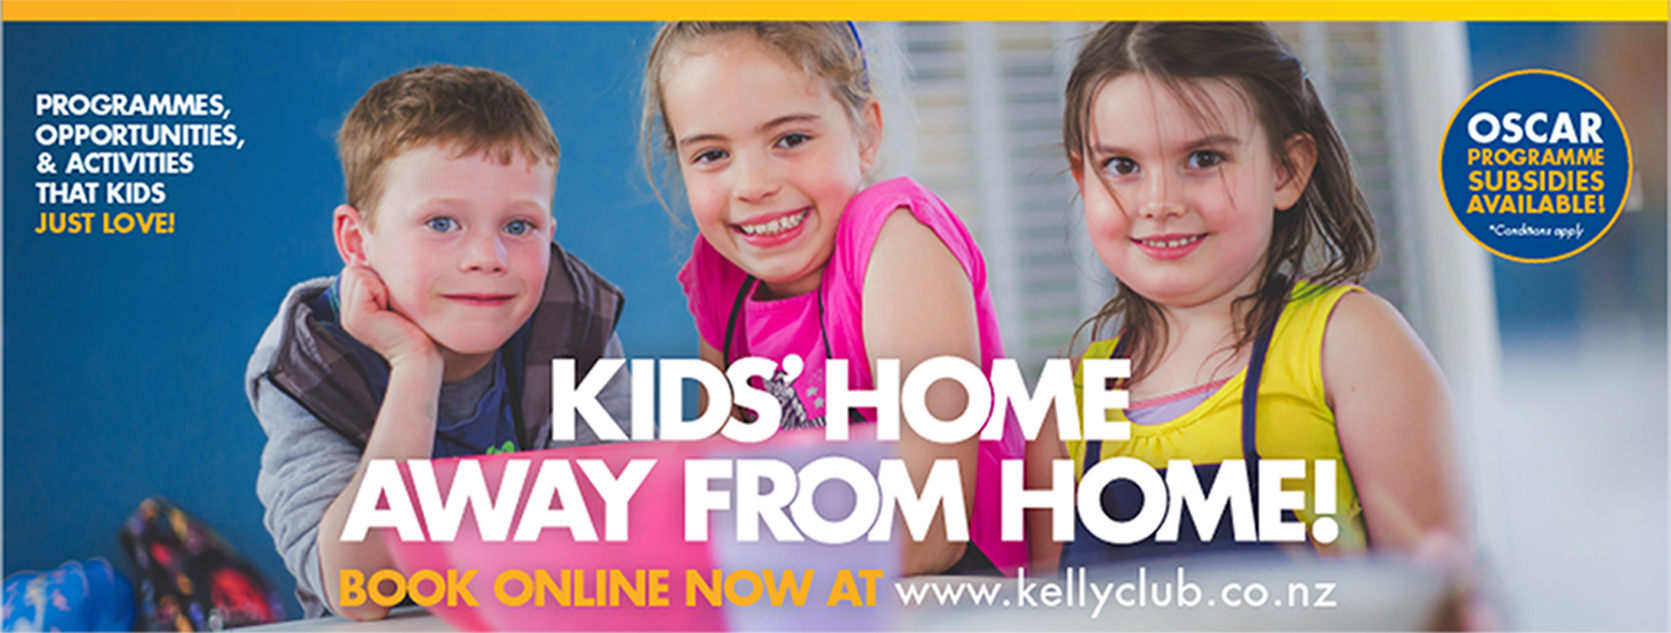 Kelly Club Kids home away from home v2